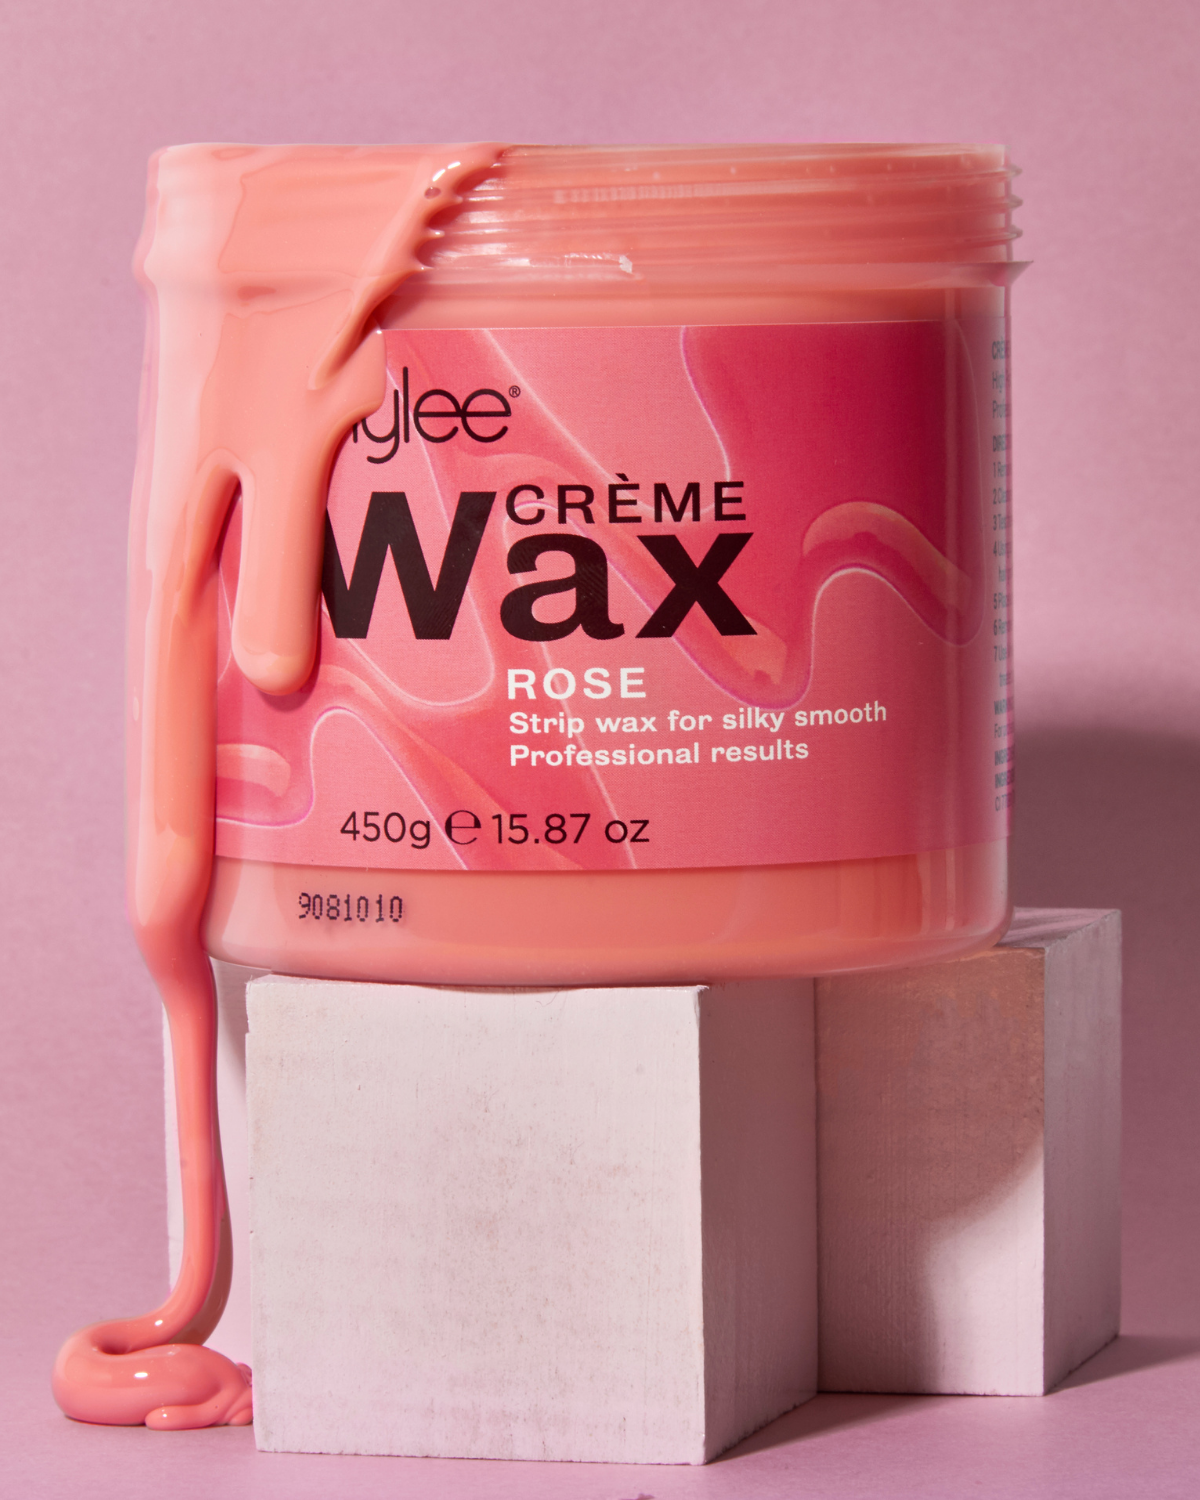 Things To Know If It's Your First Time Waxing At Home